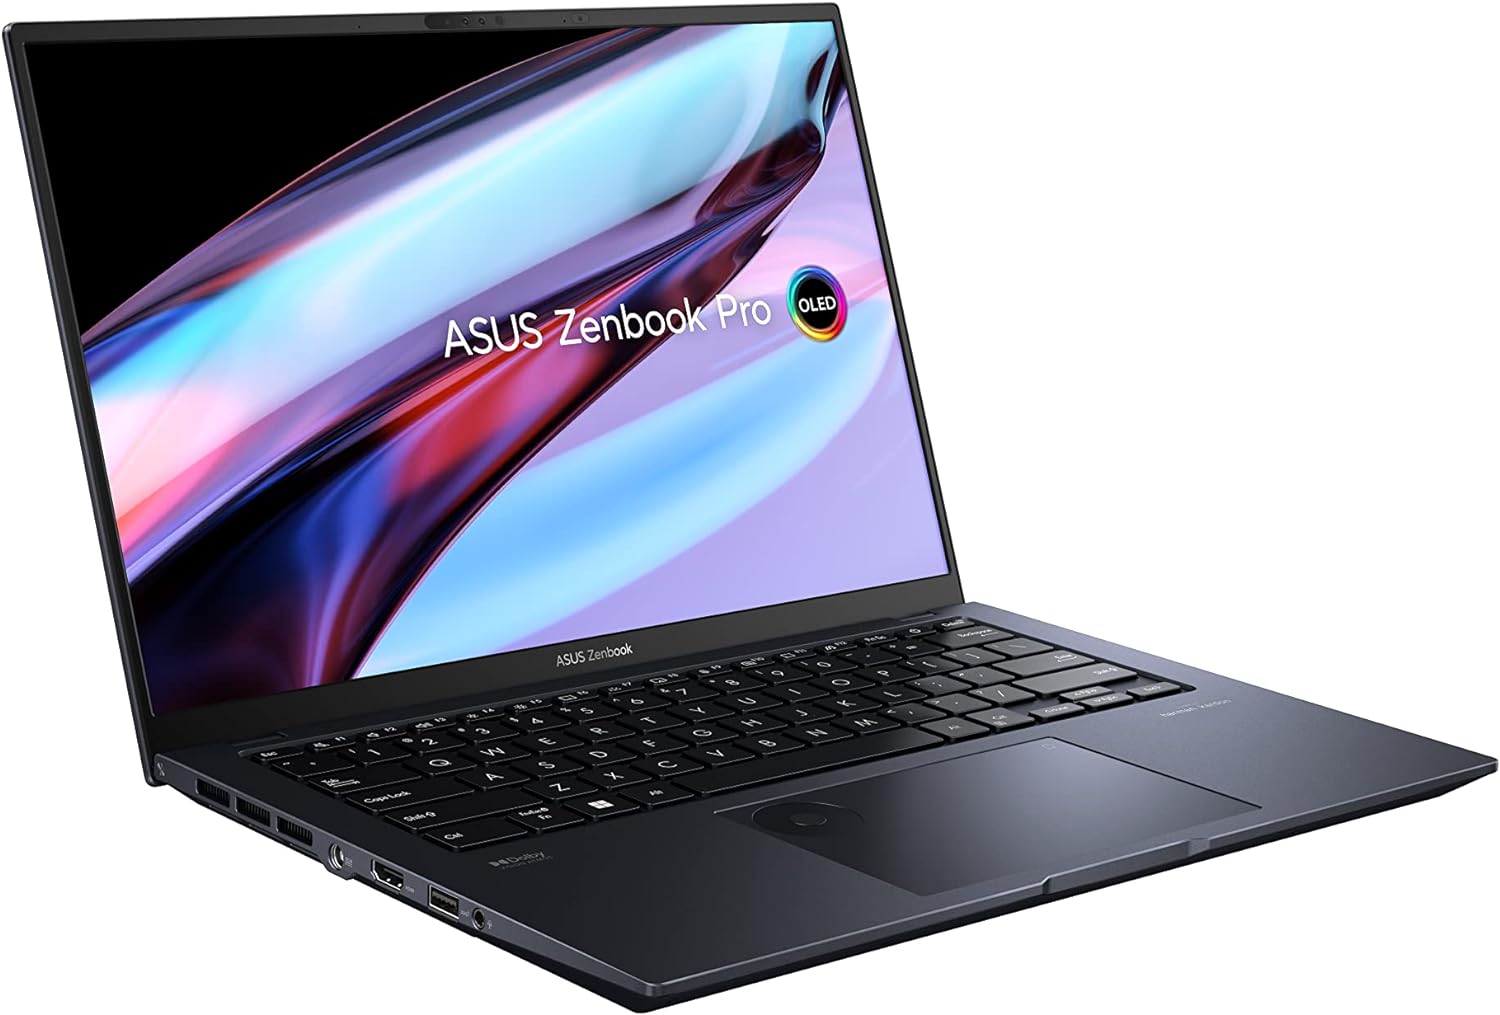 ASUS Zenbook Pro 14 OLED review